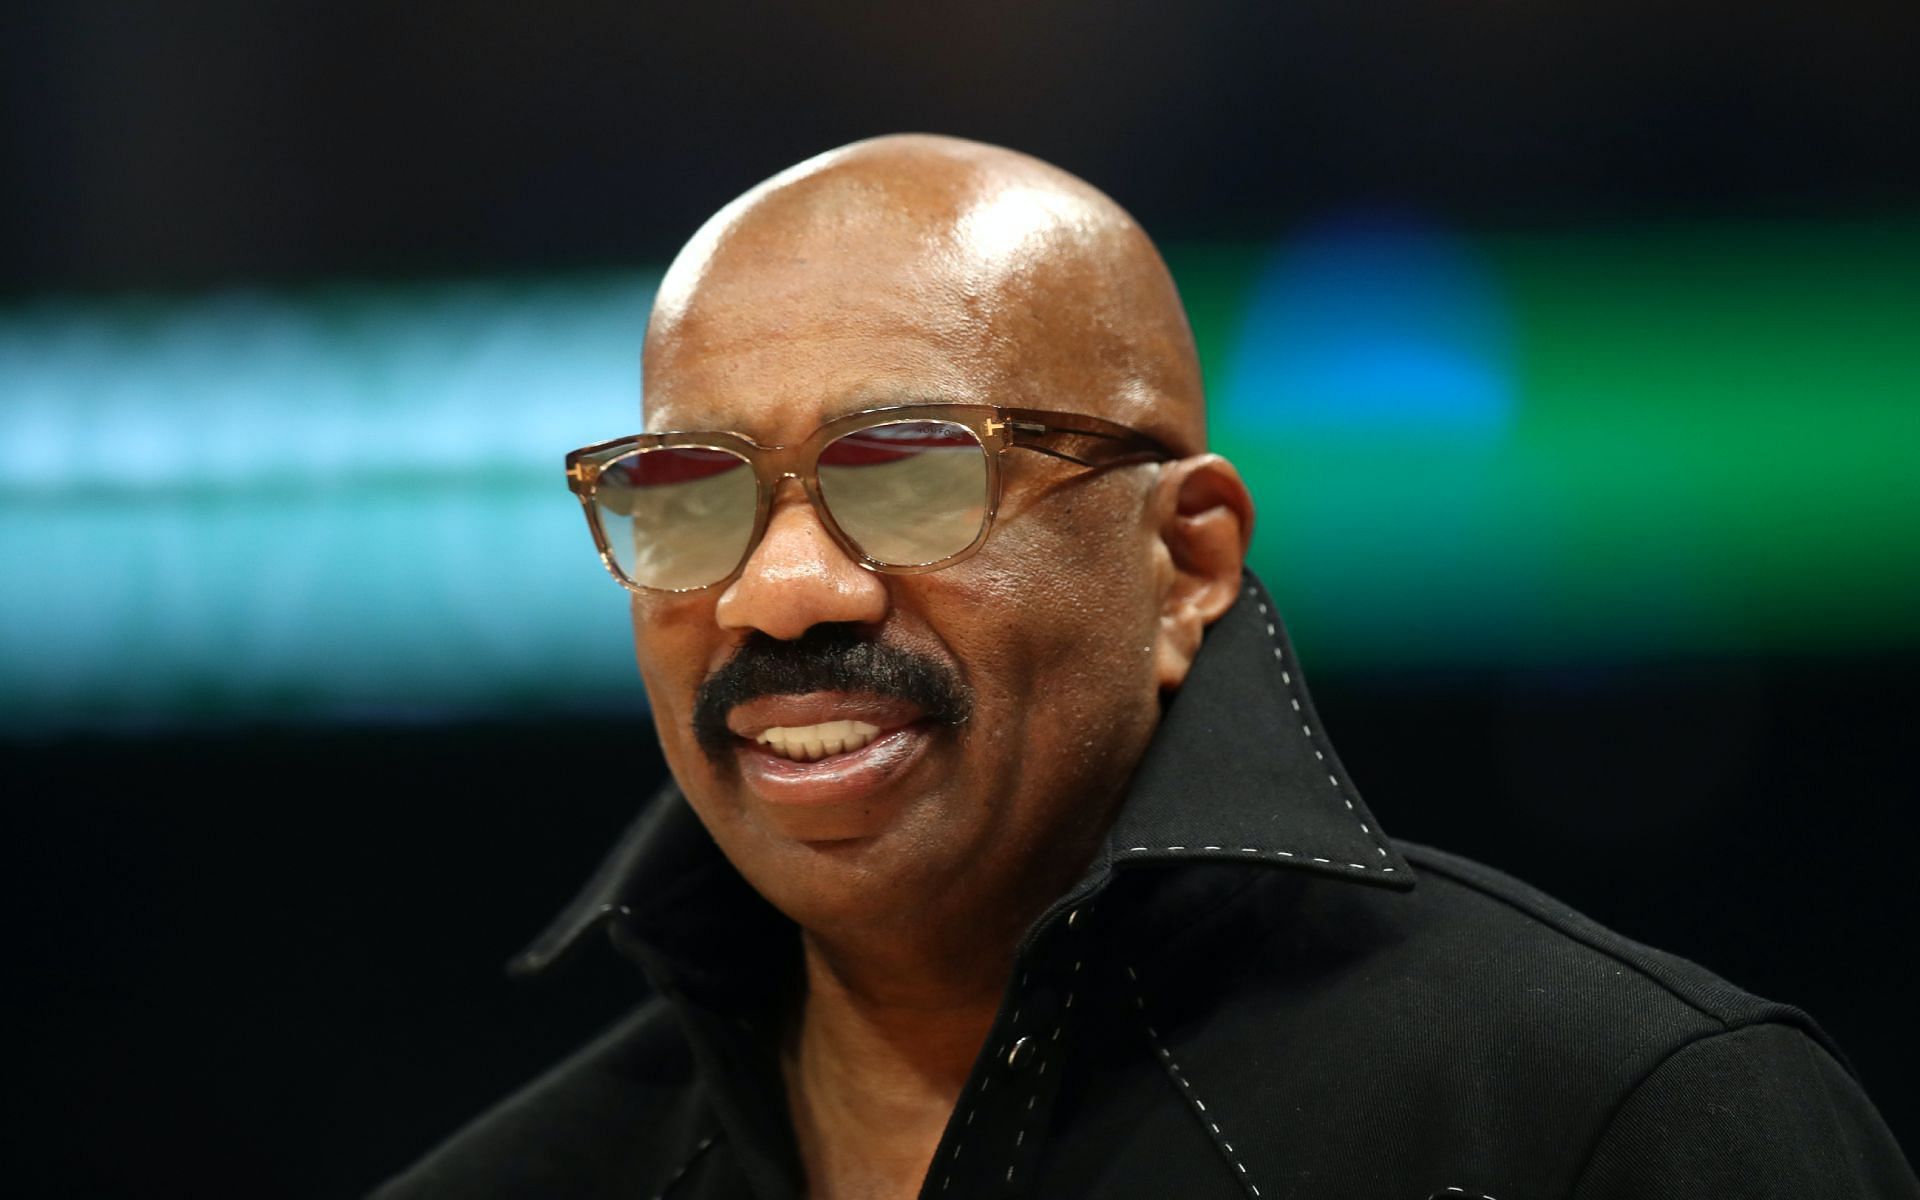 Steve Harvey [Image credits: Getty Images]